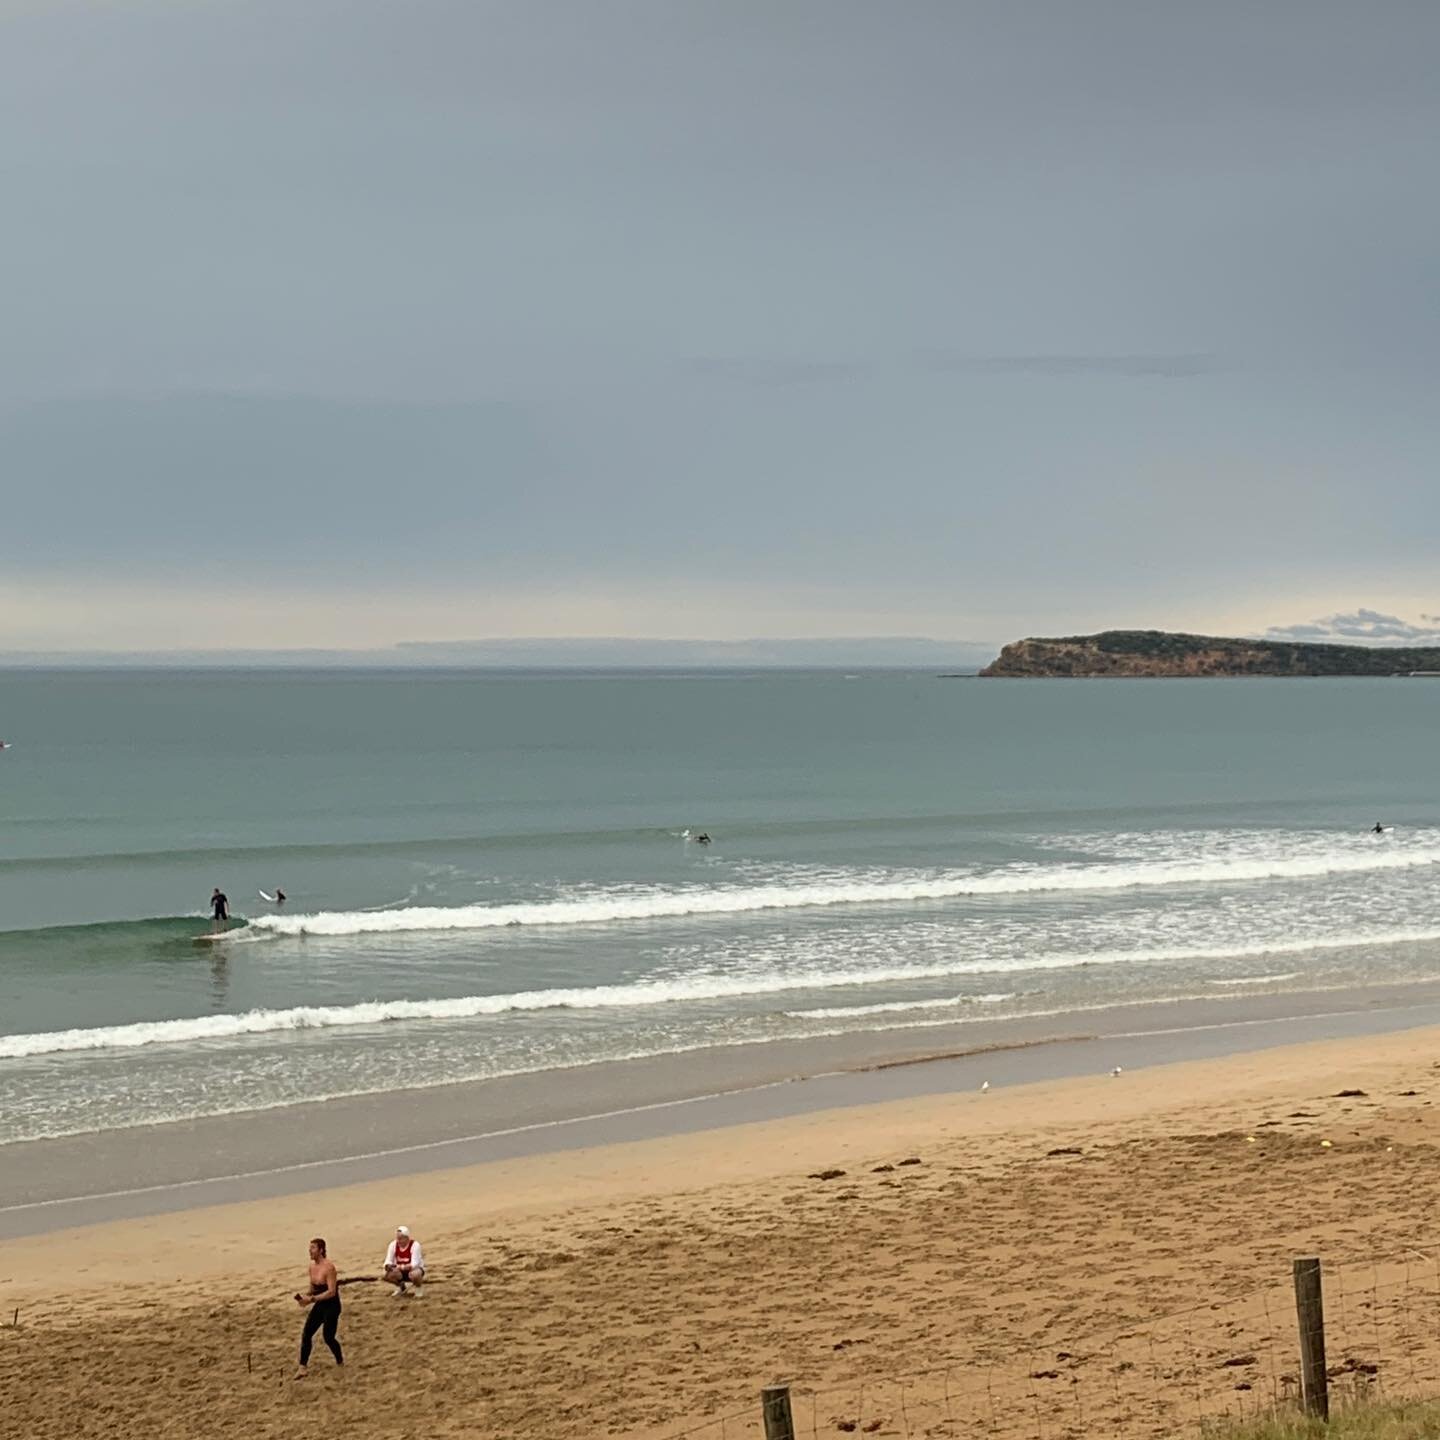 Great small waves for the start of Surf Sessions term 1 nudie SurfGroms..... go Groms!